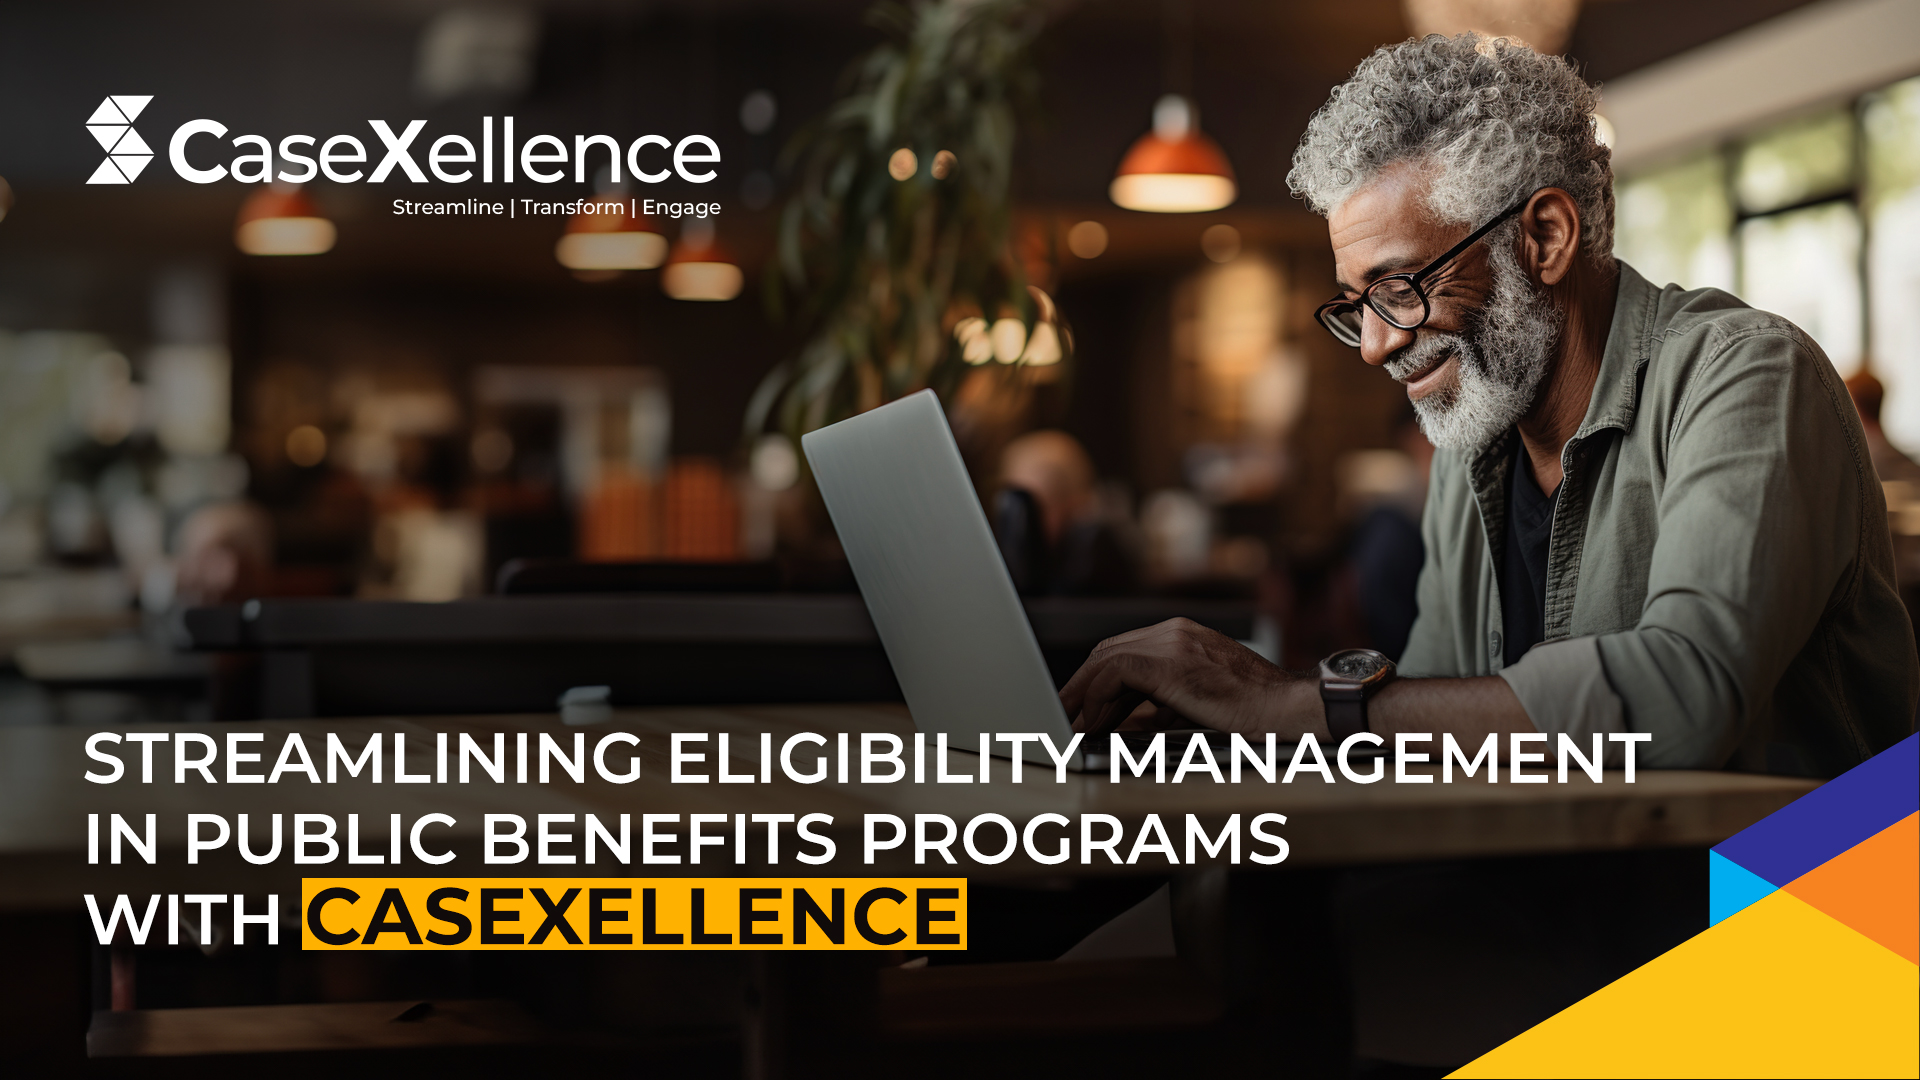 Streamlining Eligibility Management in Public Benefits Programs with CaseXellence